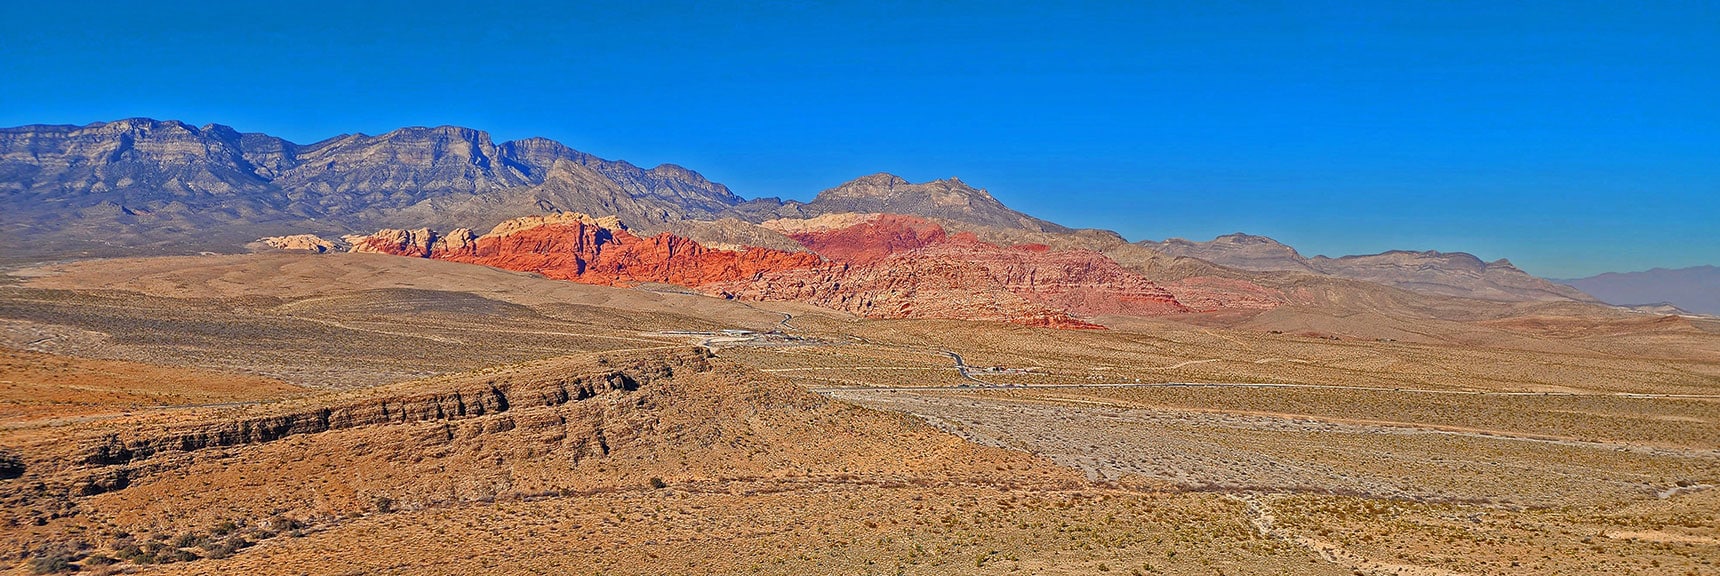 Equestrian Loop Ridge with Calico Basin Background. Calico Hills, Kraft Mt, Damsel Peak | Eastern Outer Circuit | Blue Diamond Hill | Red Rock Canyon, Nevada